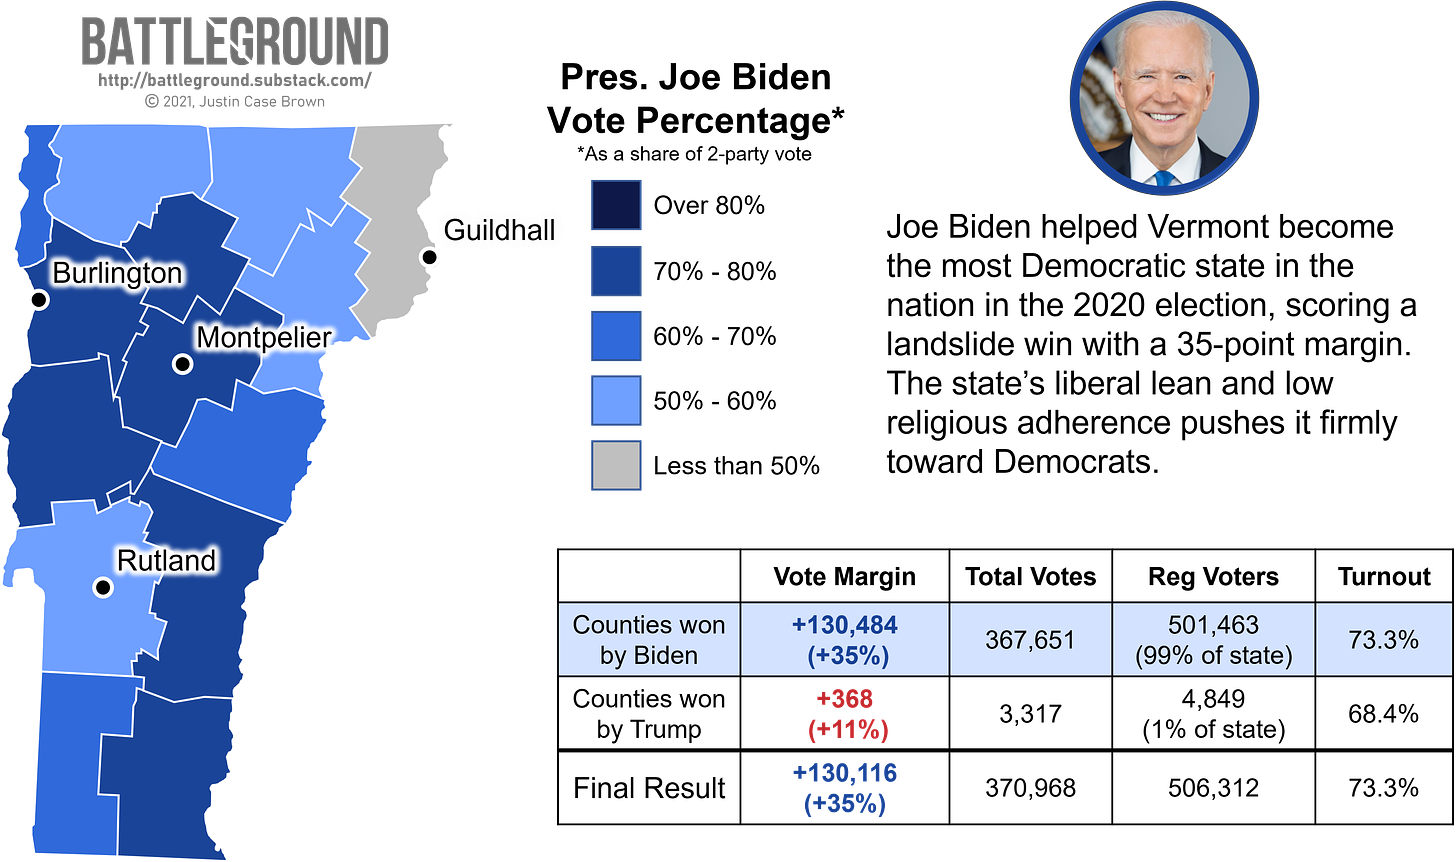 How Vermont Voted for Joe Biden in the 2020 Election